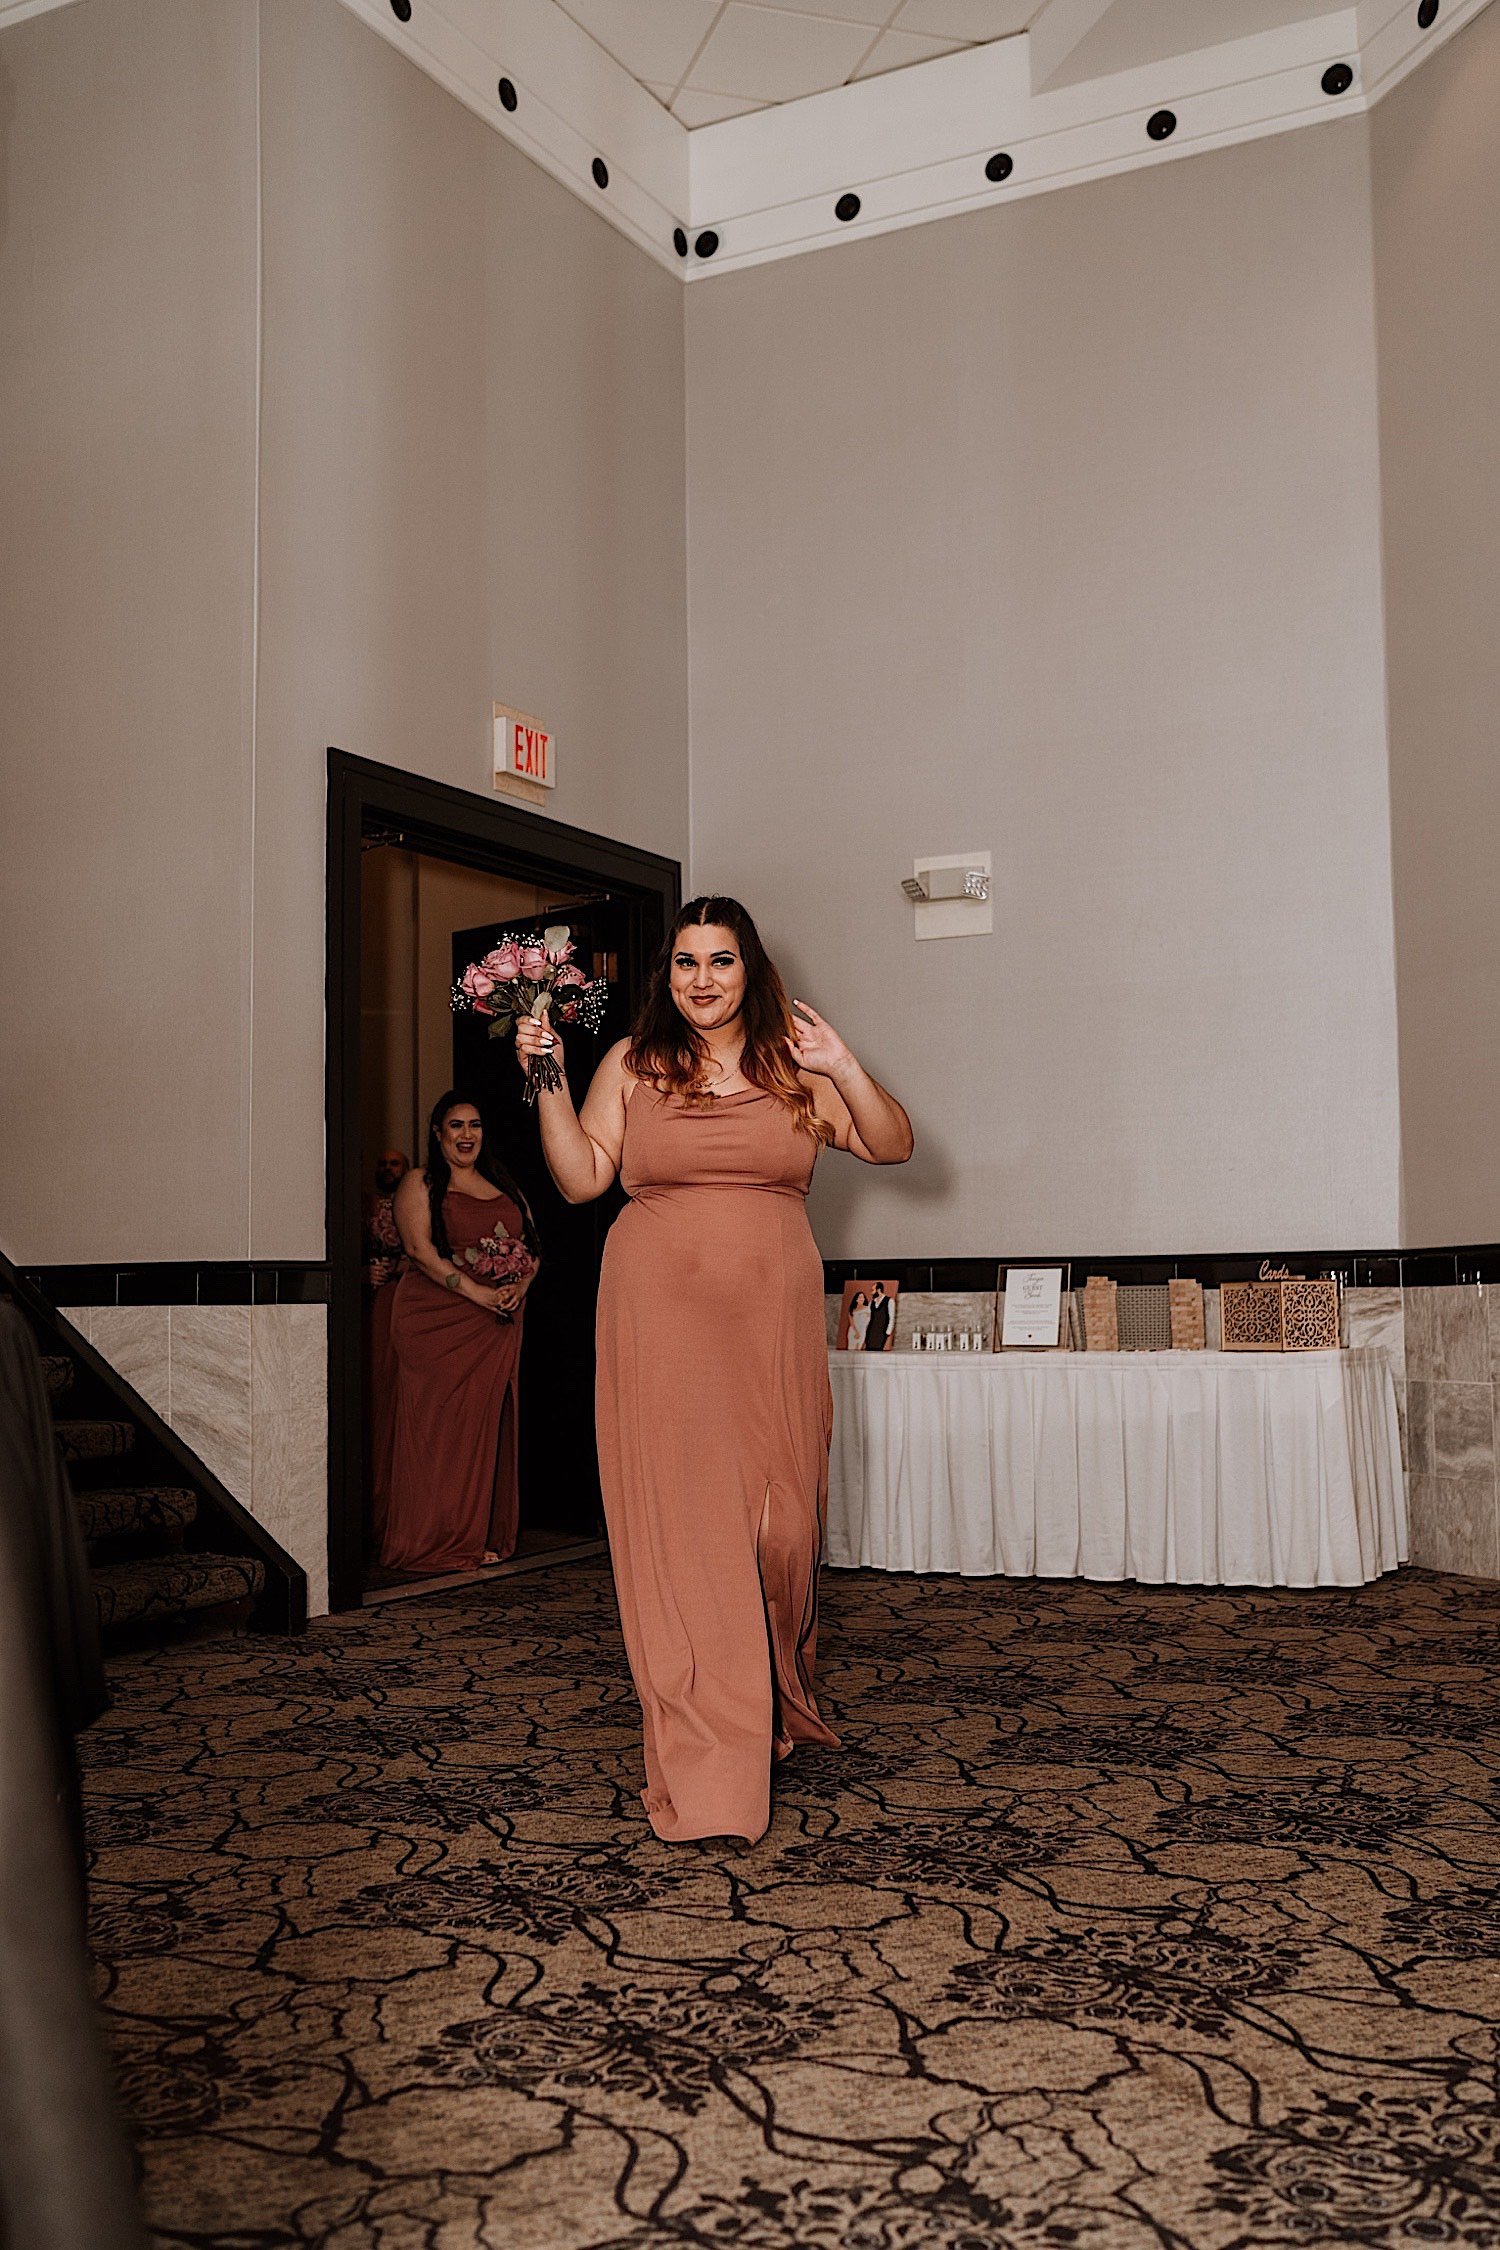 Bridesmaids enter the ballroom for the wedding reception holding bouquets